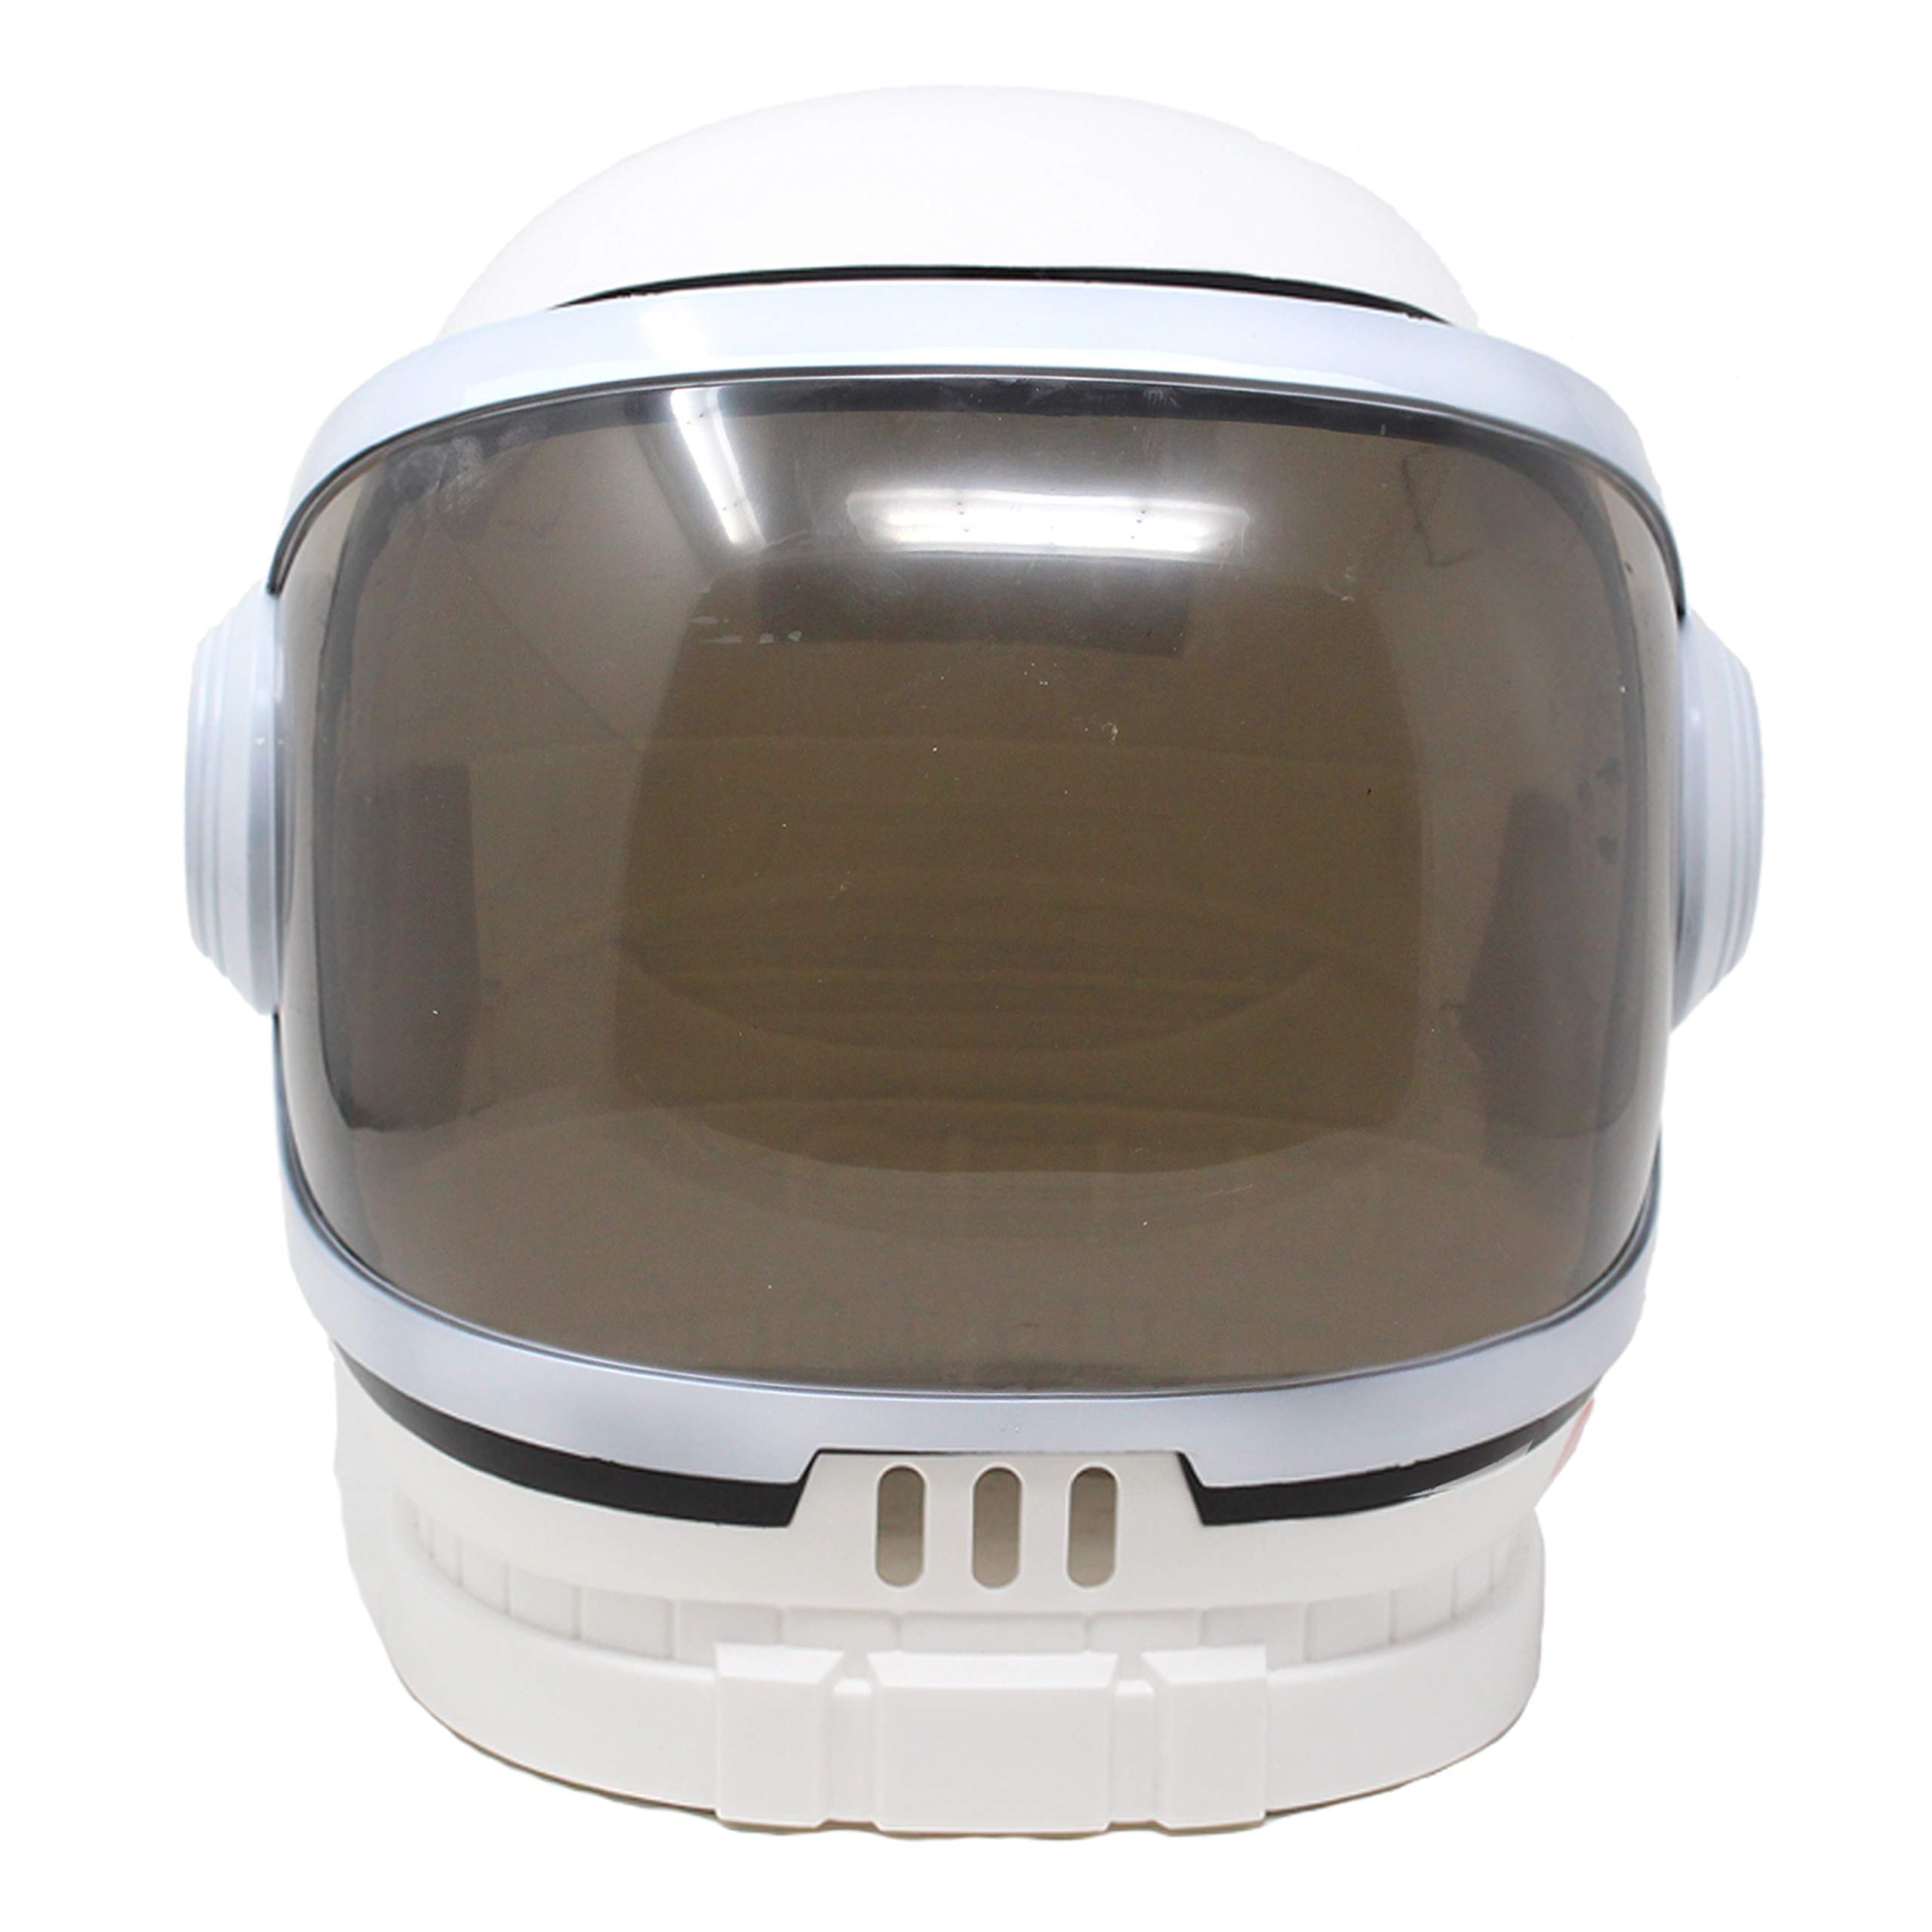 Astronaut Helmet with Movable Visor Pretend Play Toy Set for School Classroom Dress Up, Role Play Accessory, Holiday Gift Stocking, Birthday Halloween Party Favor Supplies, Girls, Boys, Kids and Toddler